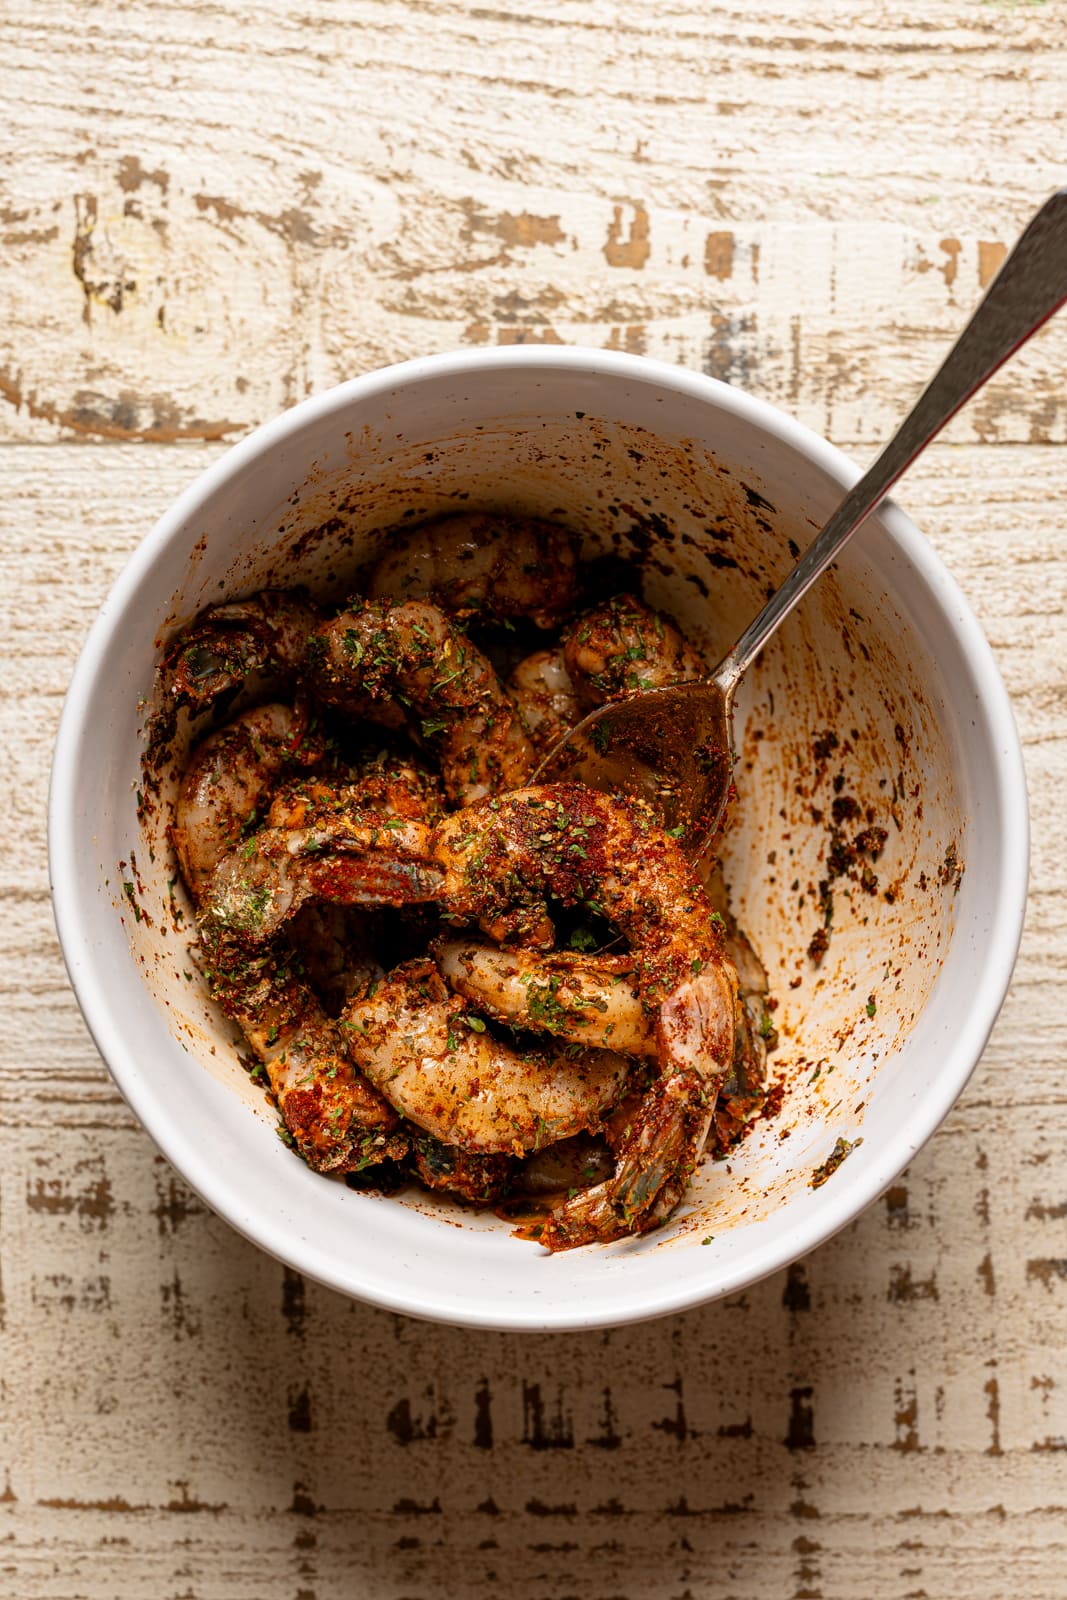 Marinated shrimp in a white bowl with a spoon.